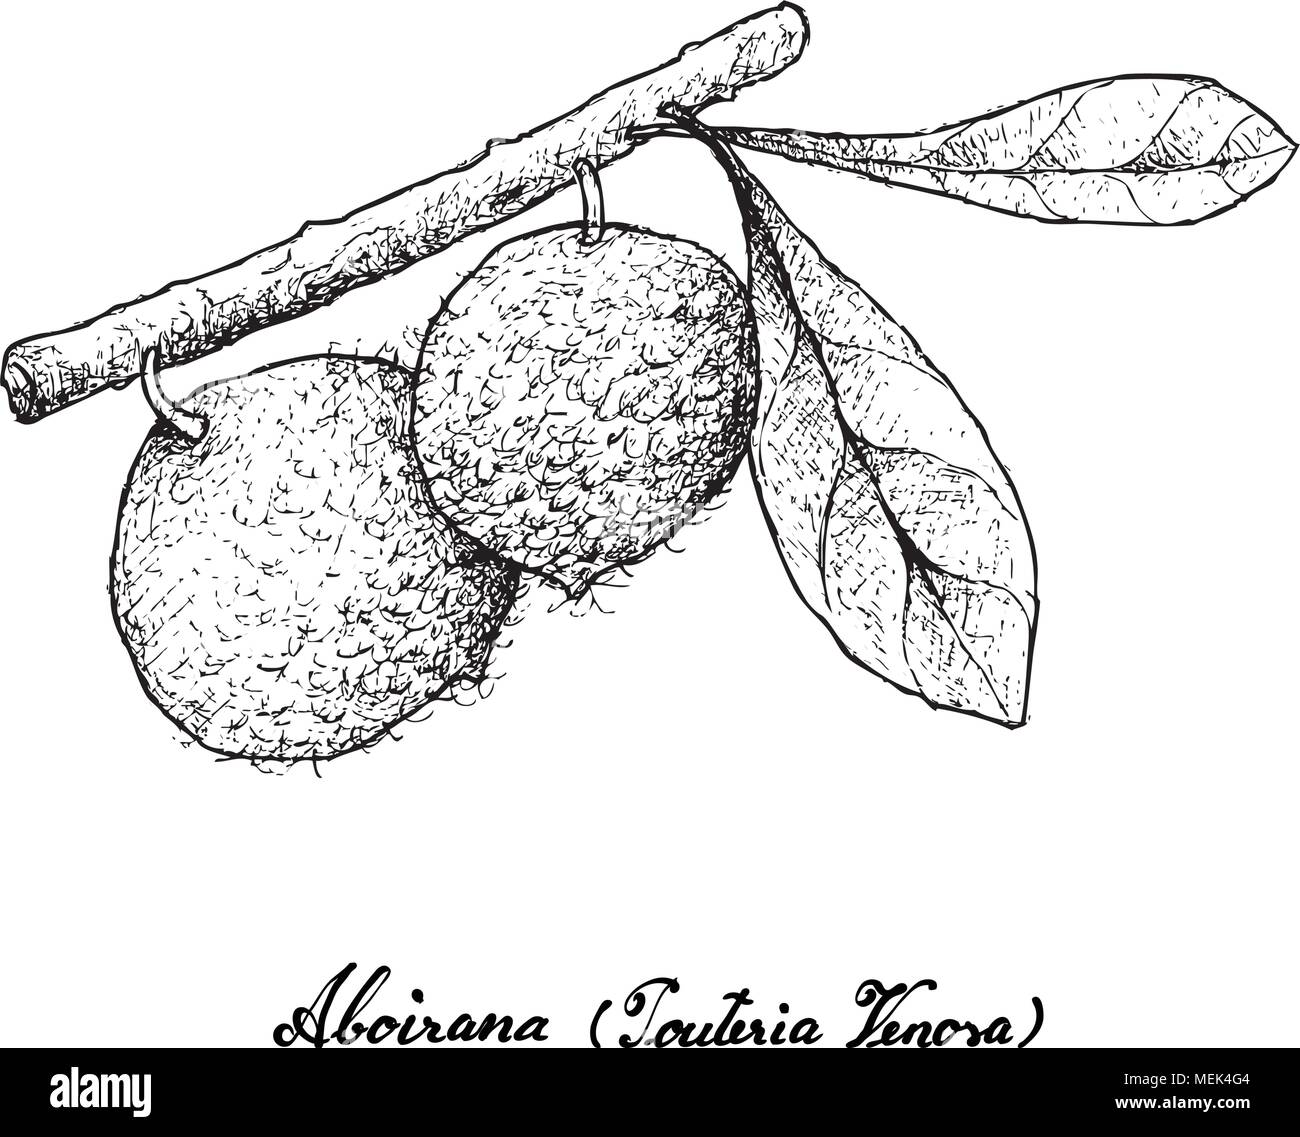 Tropical Fruits, Illustration Hand Drawn Sketch of Aboirana or Pouteria Venosa Fruits Isolated on A White Background. High in Vitamin C With Essential Stock Vector